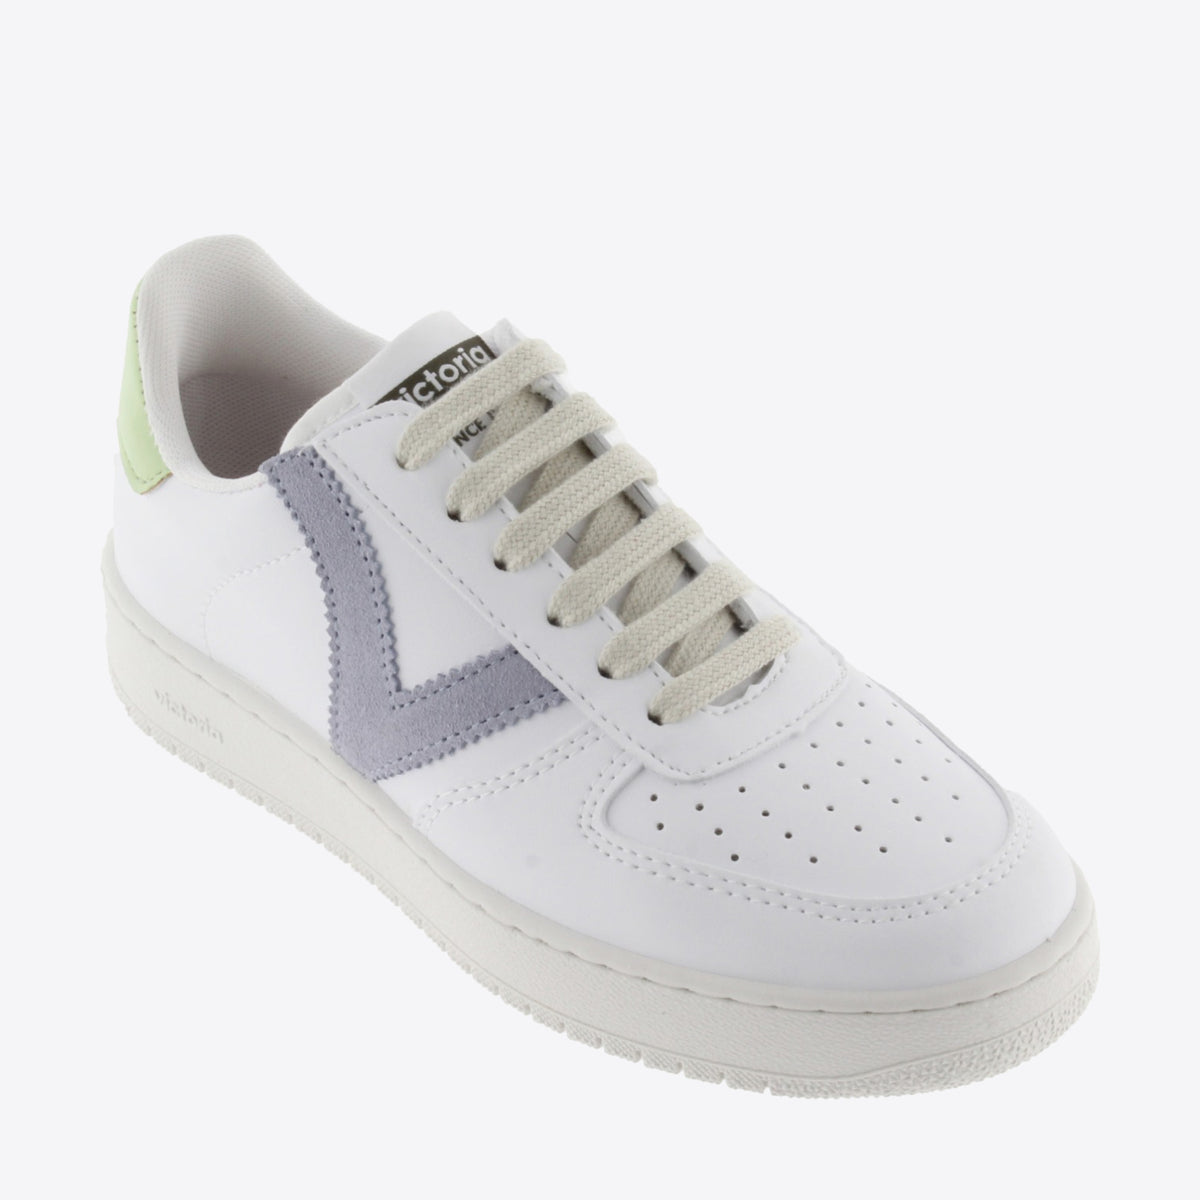 VICTORIA Madrid Contrast Faux Leather Lilac - Image 2